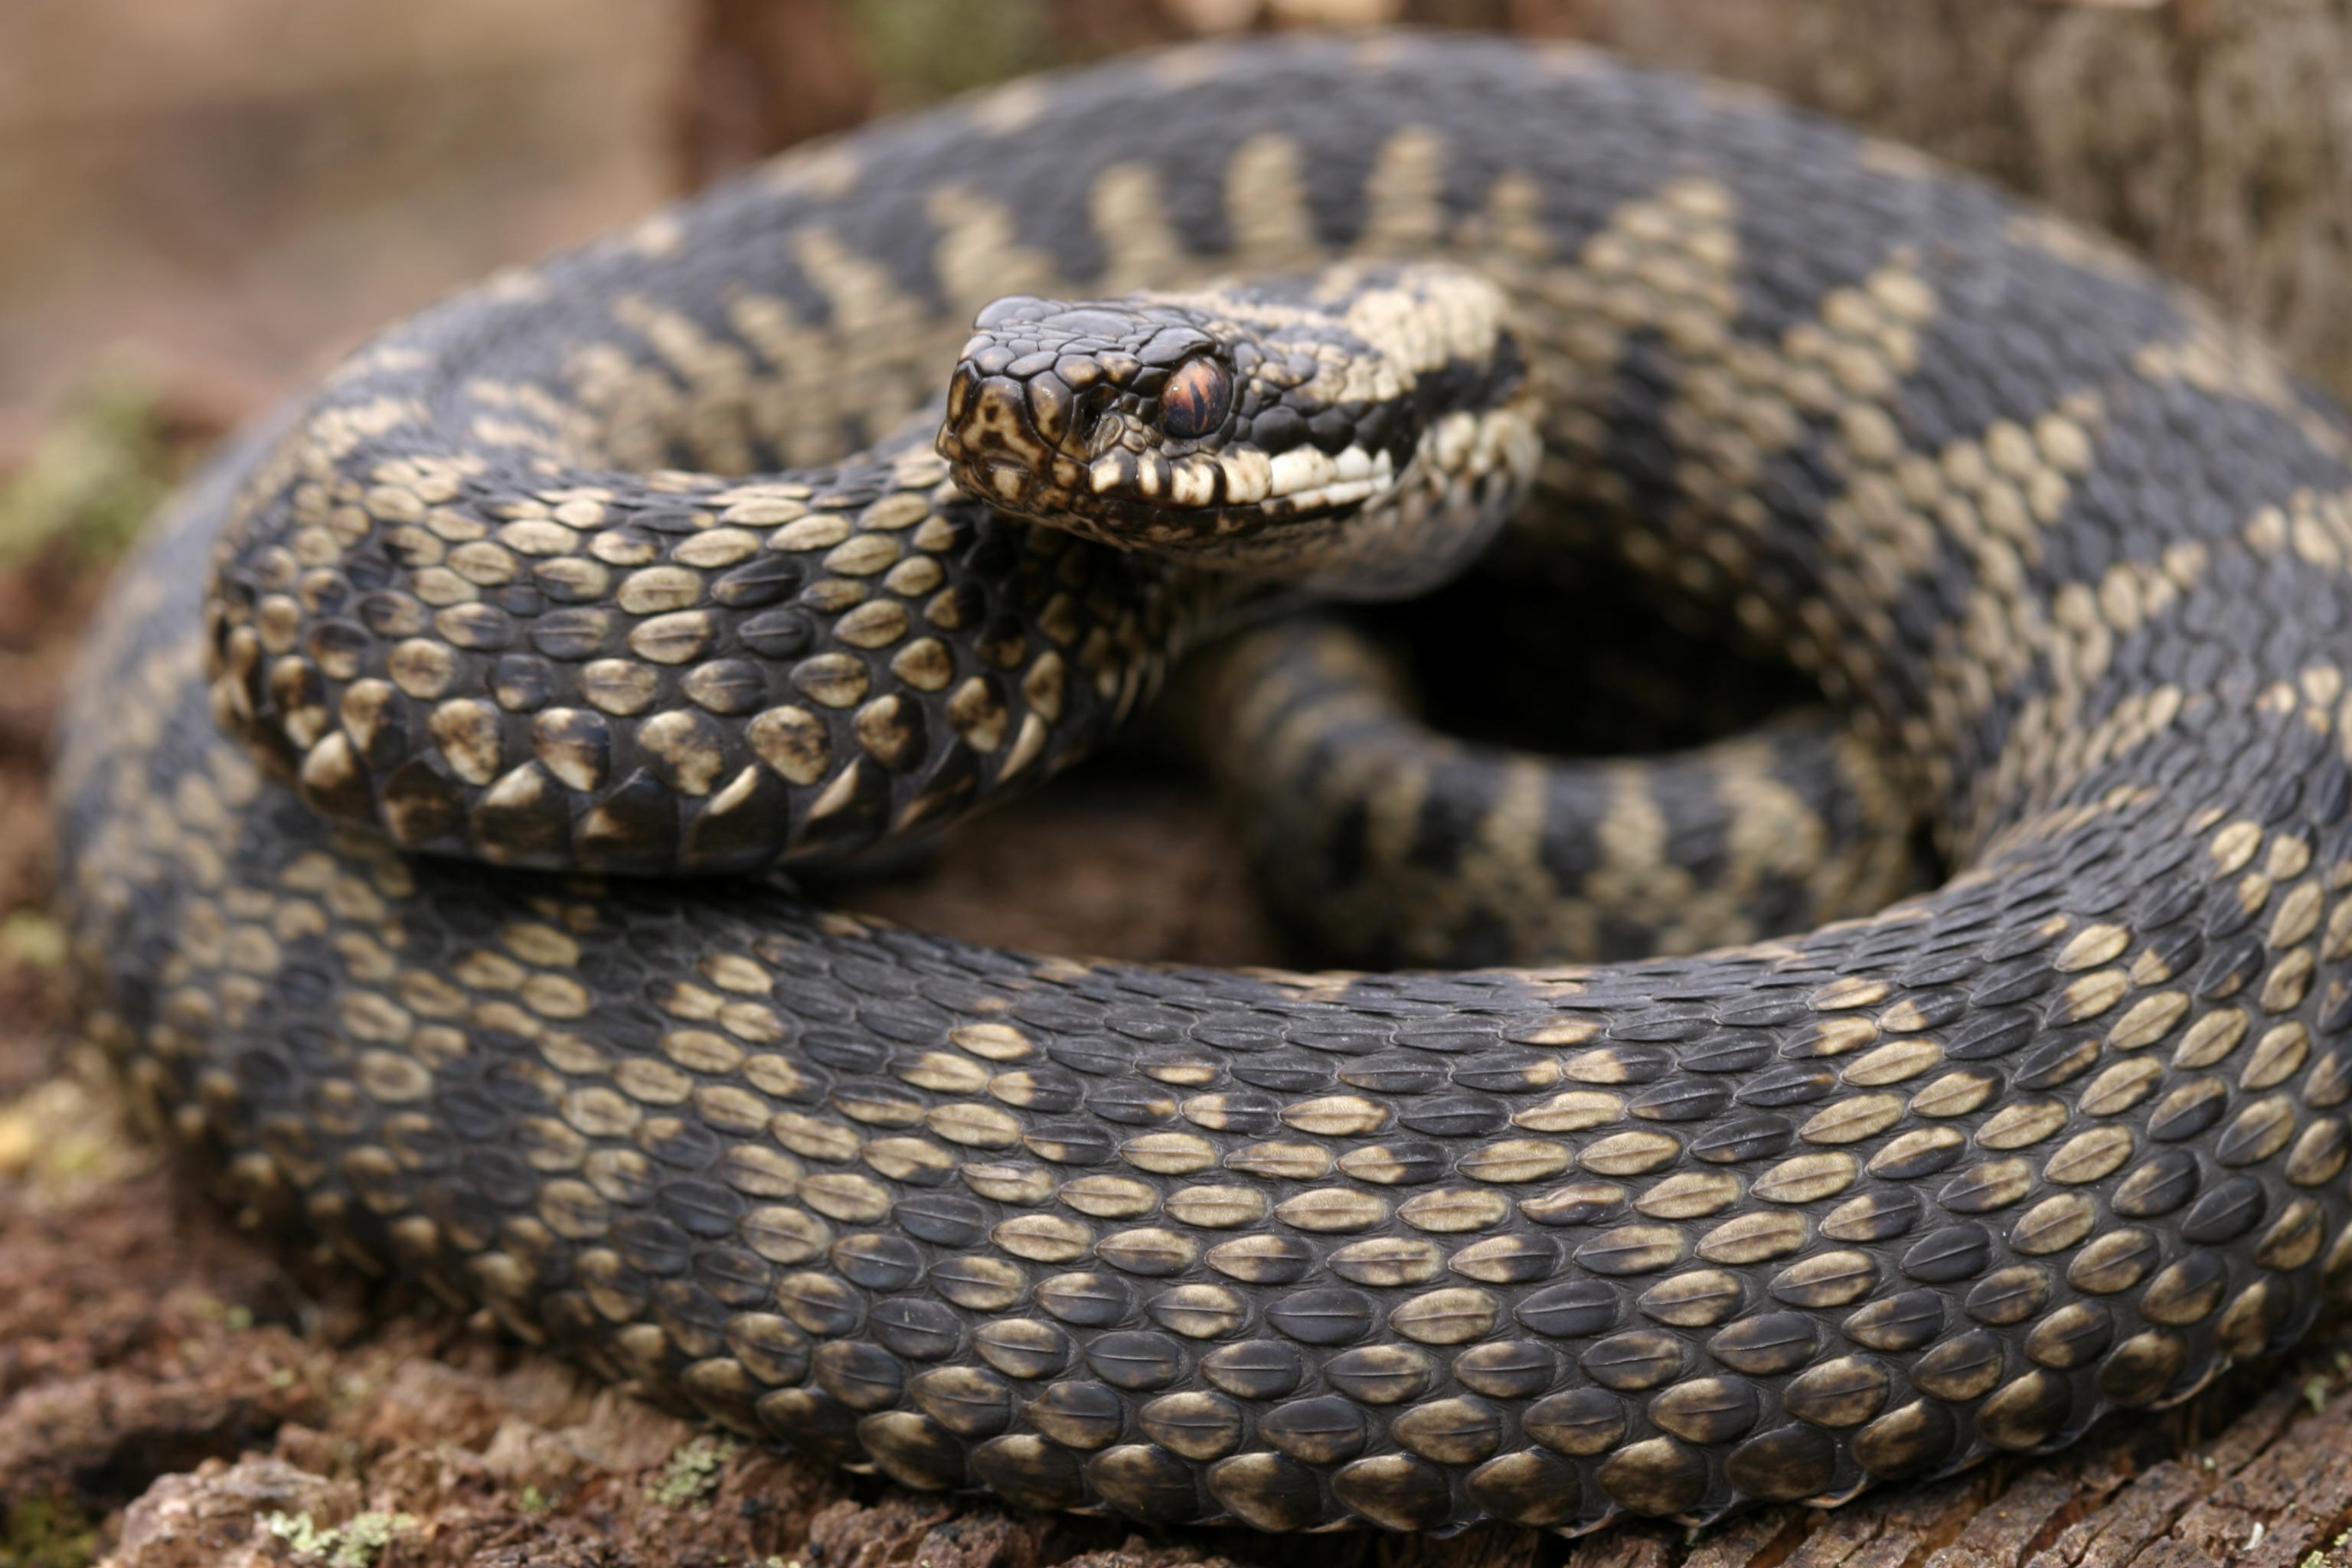 Does the UK have poisonous snakes?